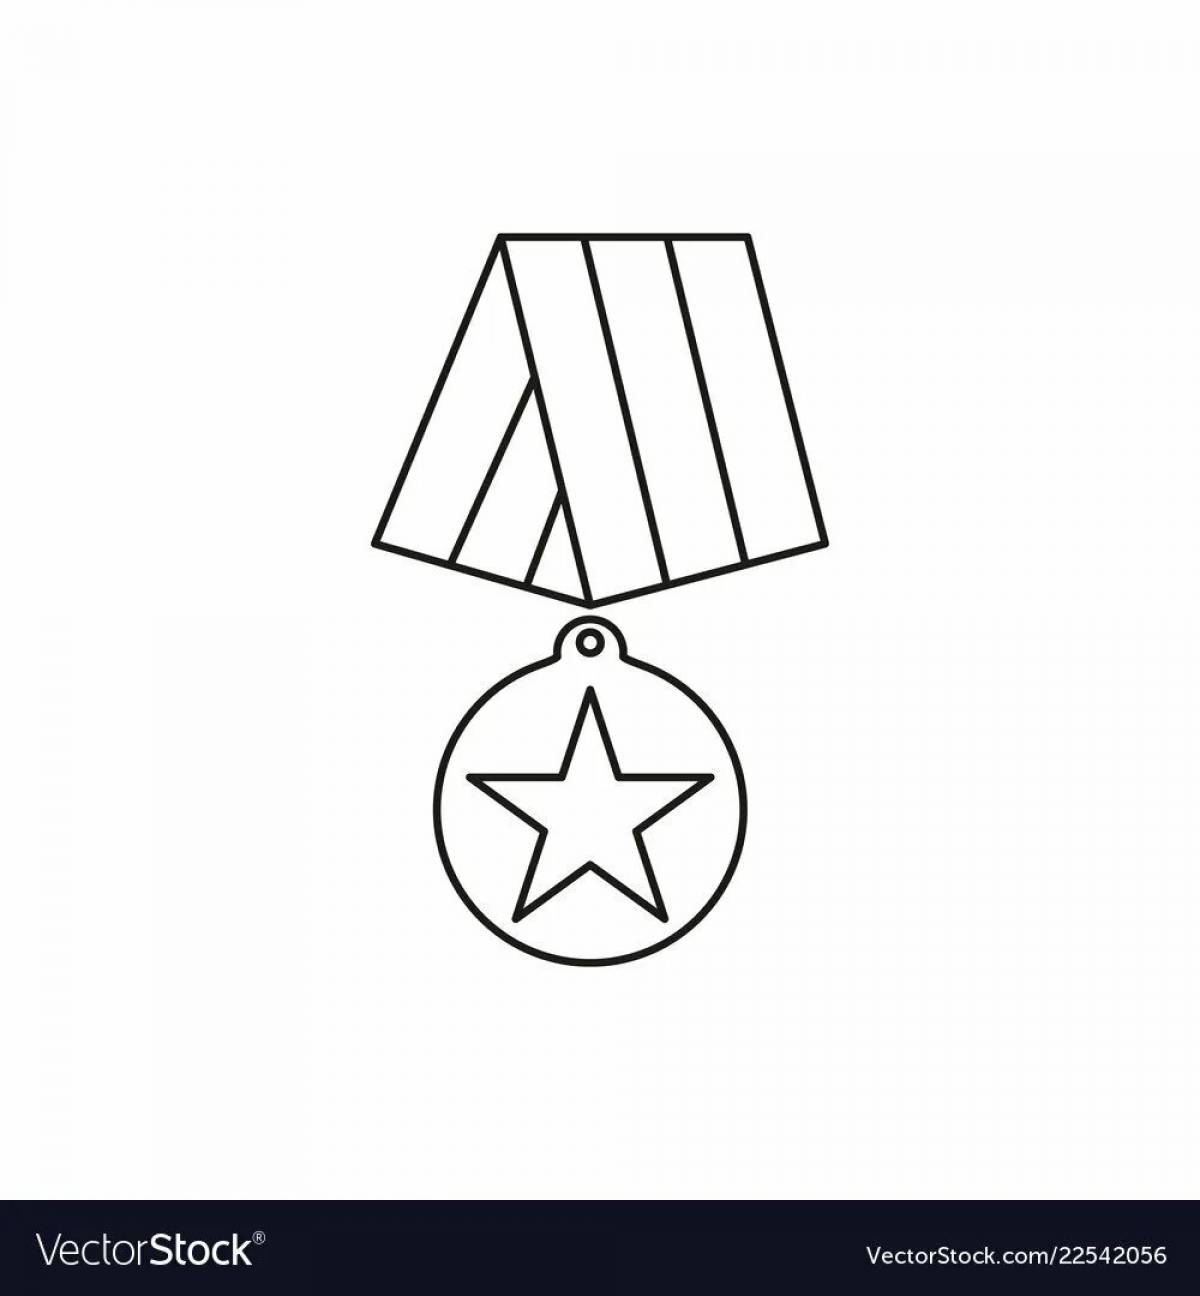 Courage Medal #9